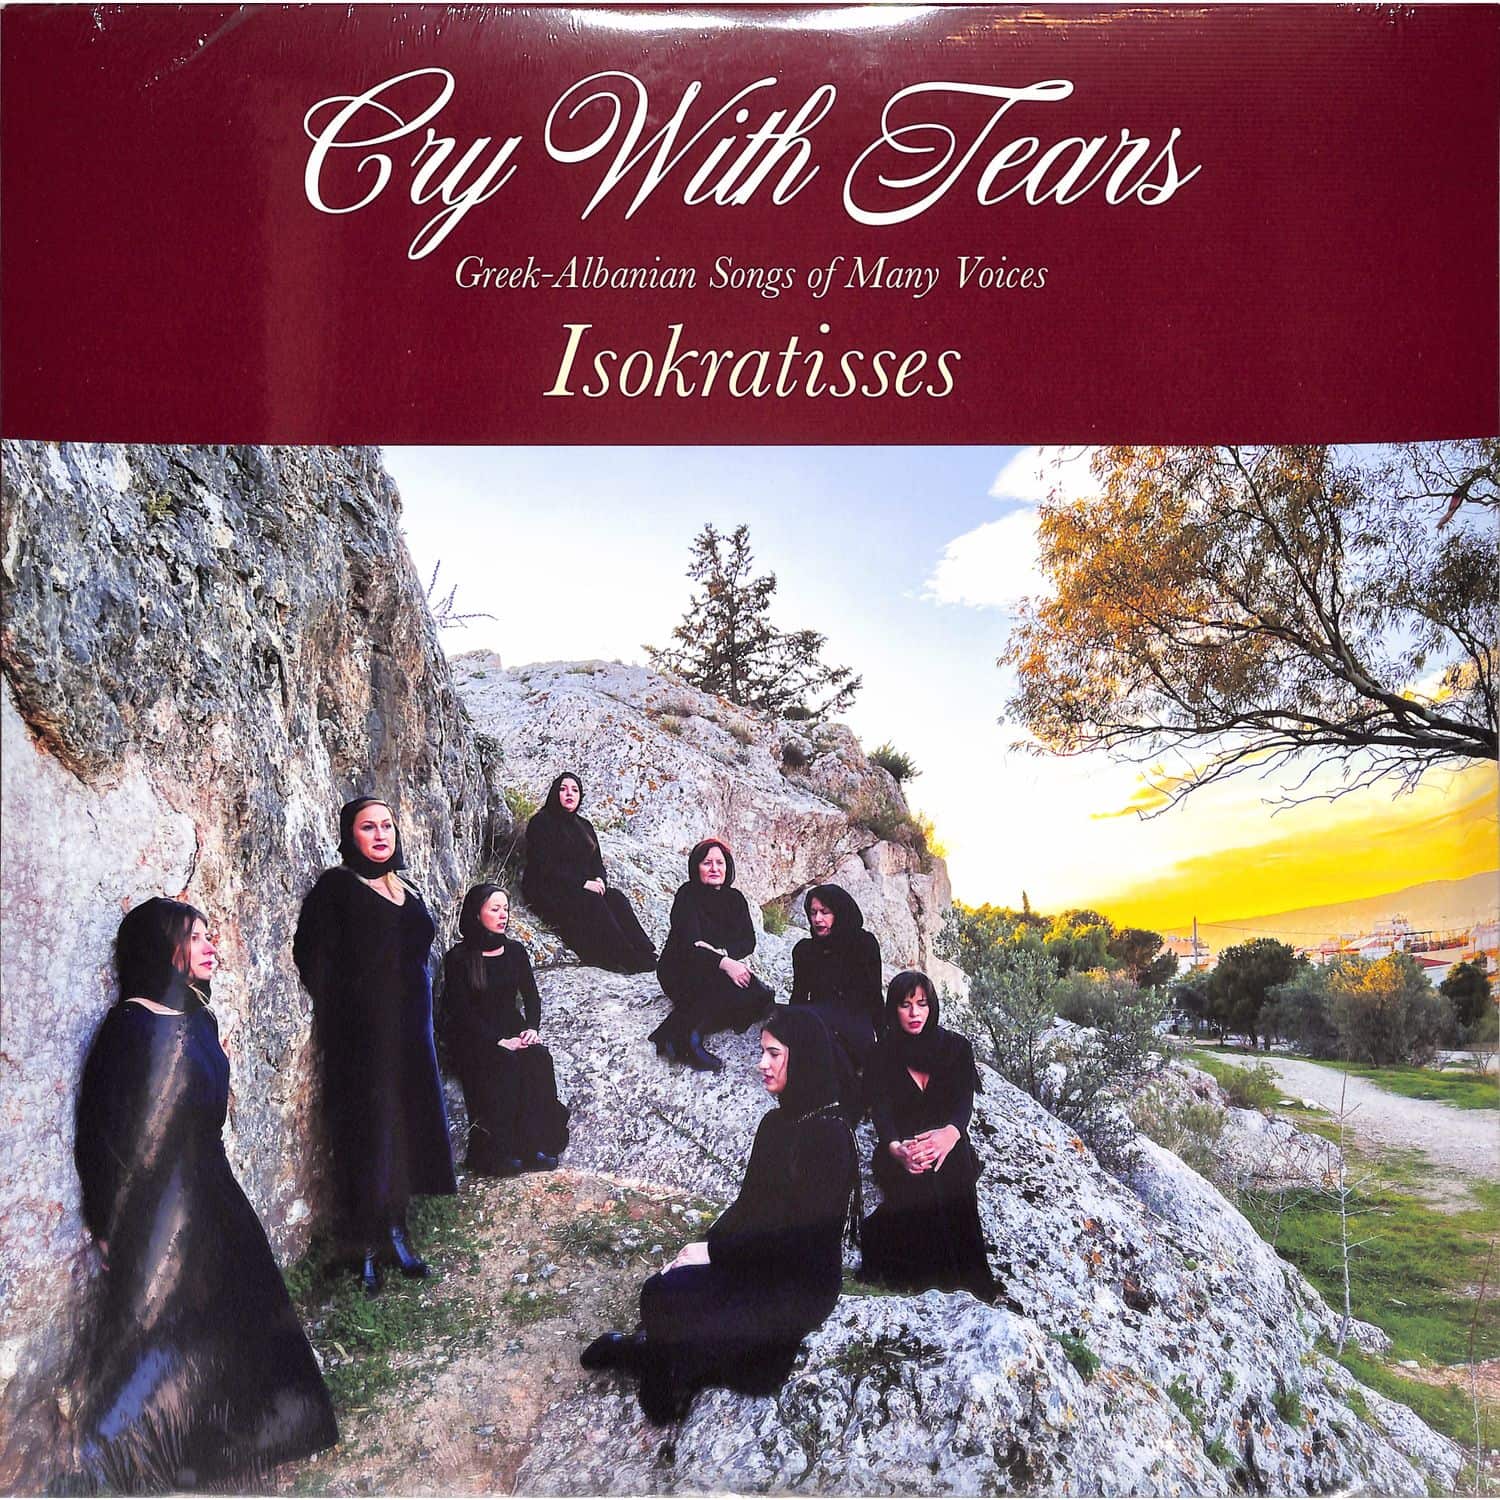 Isokratisses - CRY WITH TEARS: GREEK-ALBANIAN SONGS OF MANY VOICE 